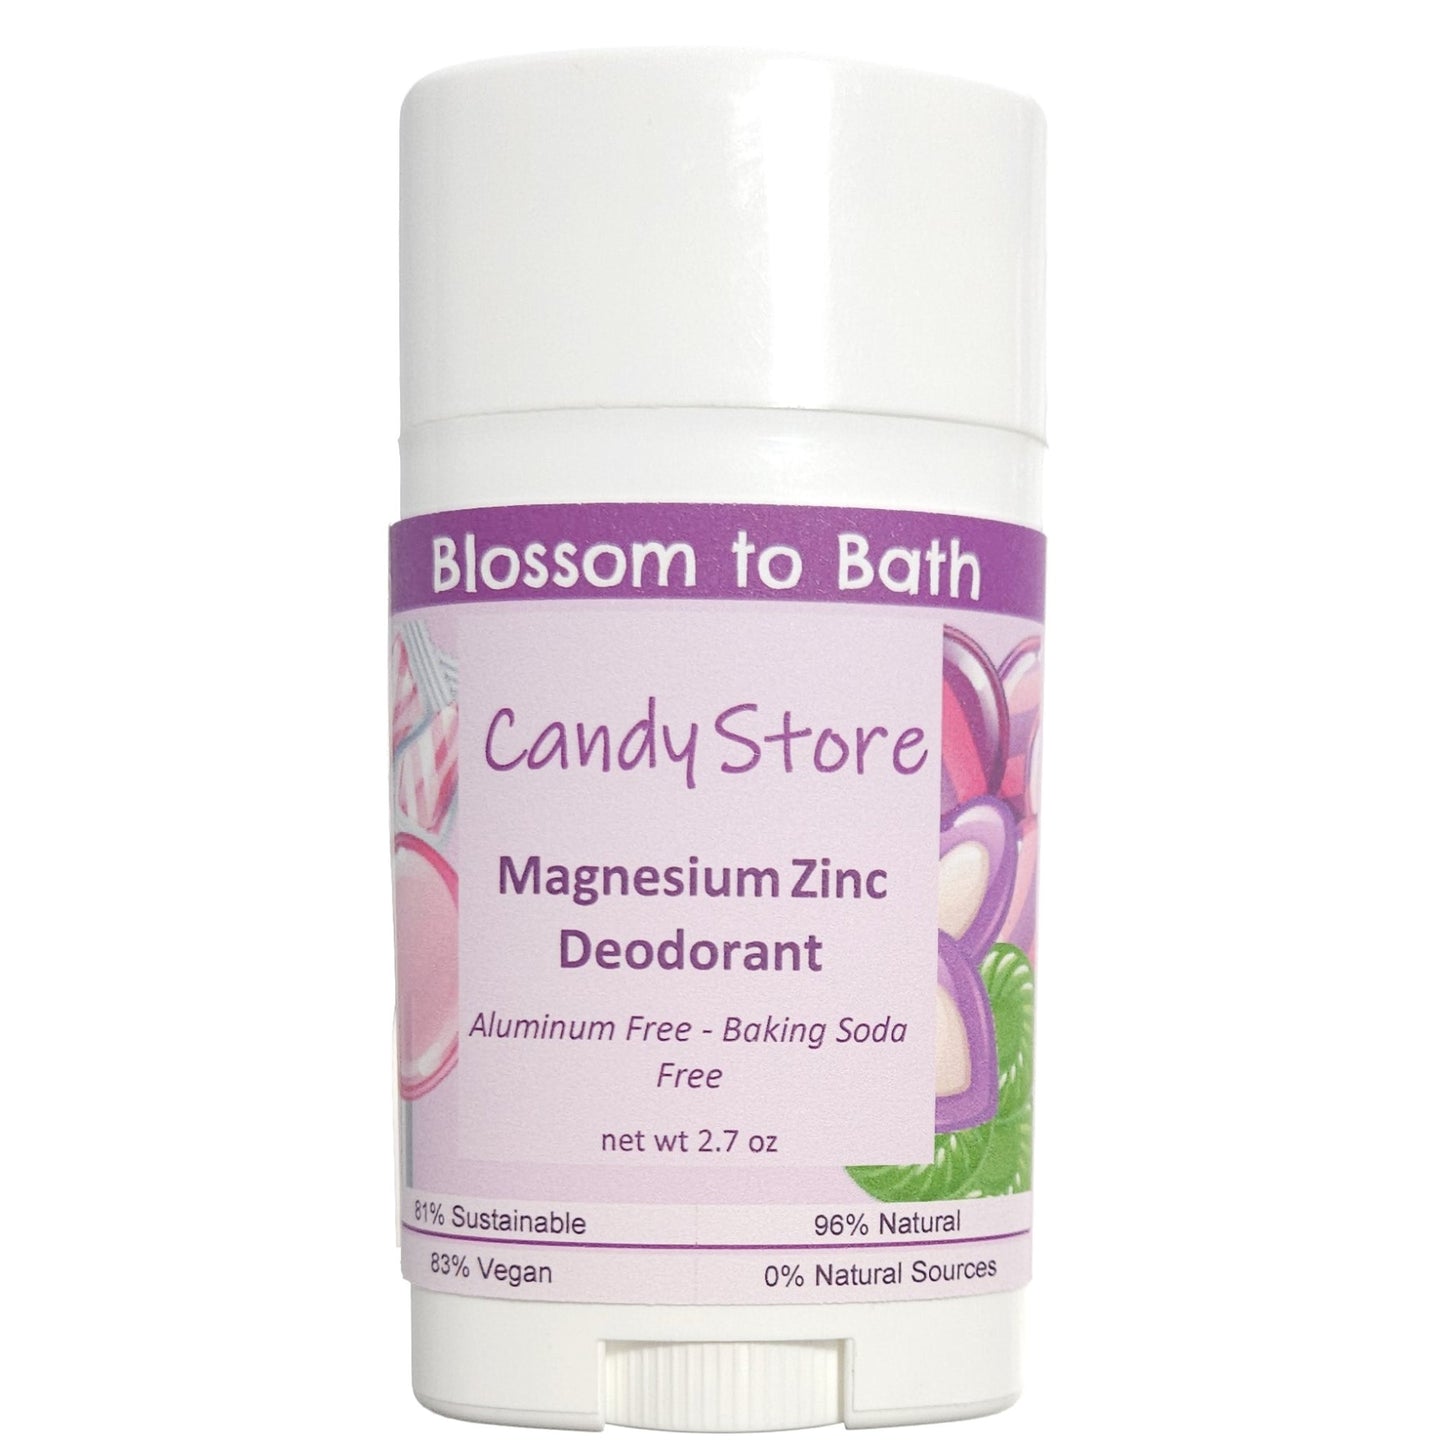 Buy Blossom to Bath Candy Store Magnesium Zinc Deodorant from Flowersong Soap Studio.  Long lasting protection made from organic botanicals and butters, made without baking soda, tested in the Arizona heat  A nostalgic fragrance has pops of sweet fruity bubbles on a bed of spun sugar and vanilla bean.